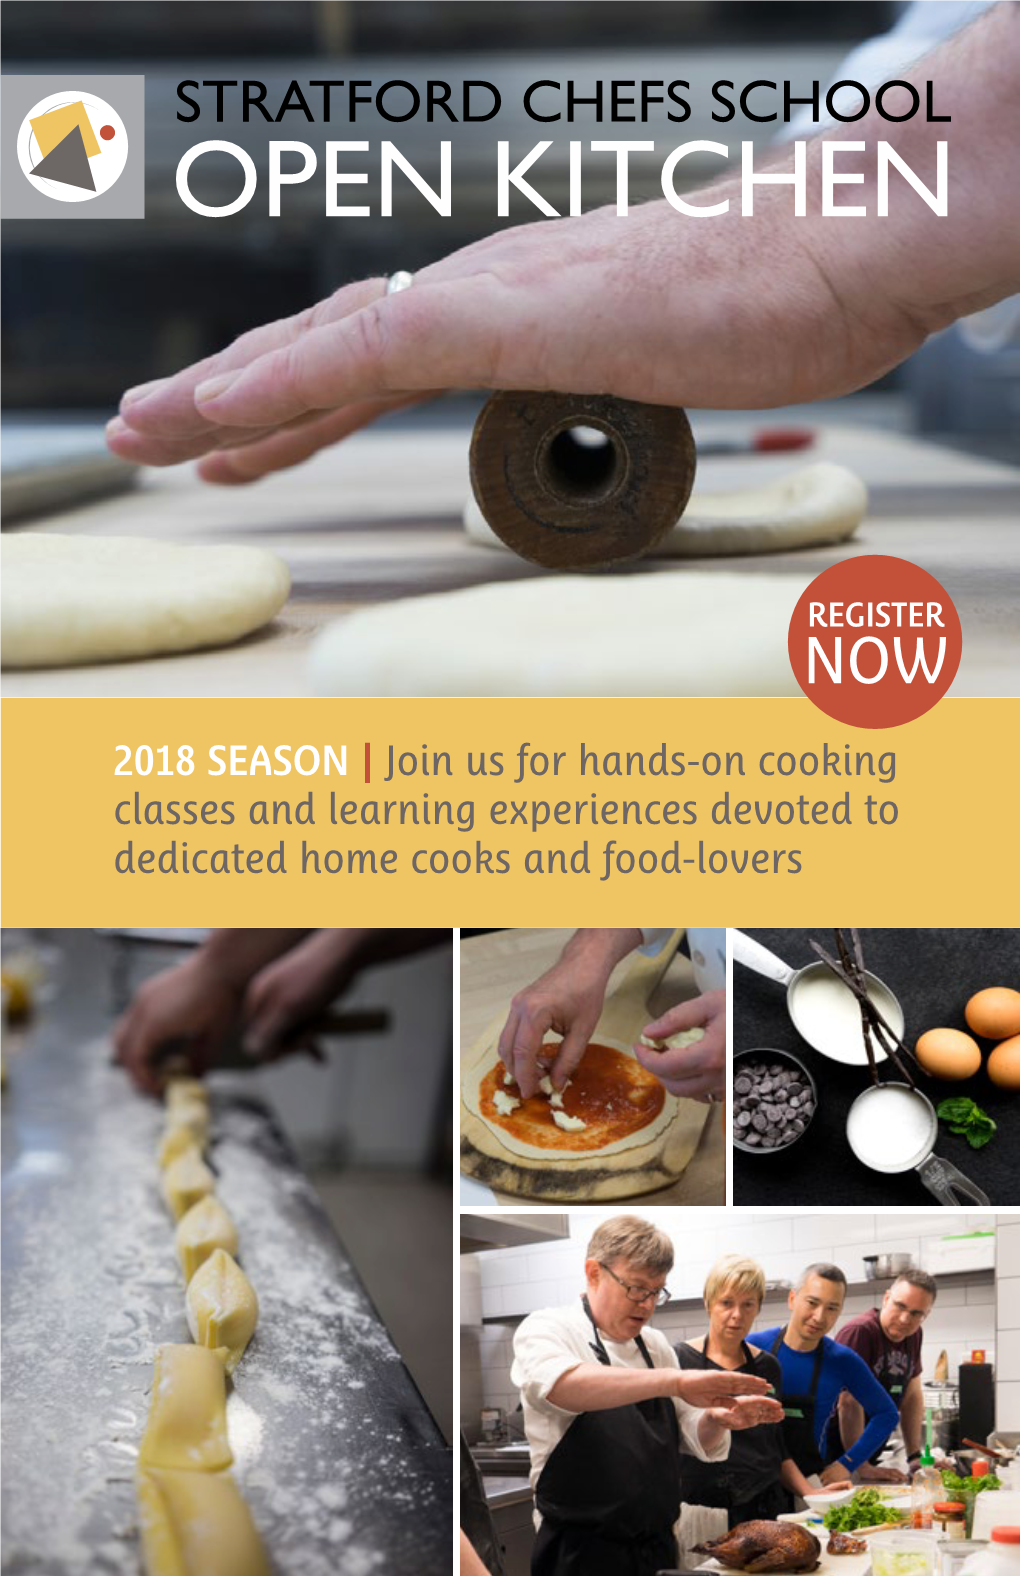 2018 SEASON | Join Us for Hands-On Cooking Classes and Learning